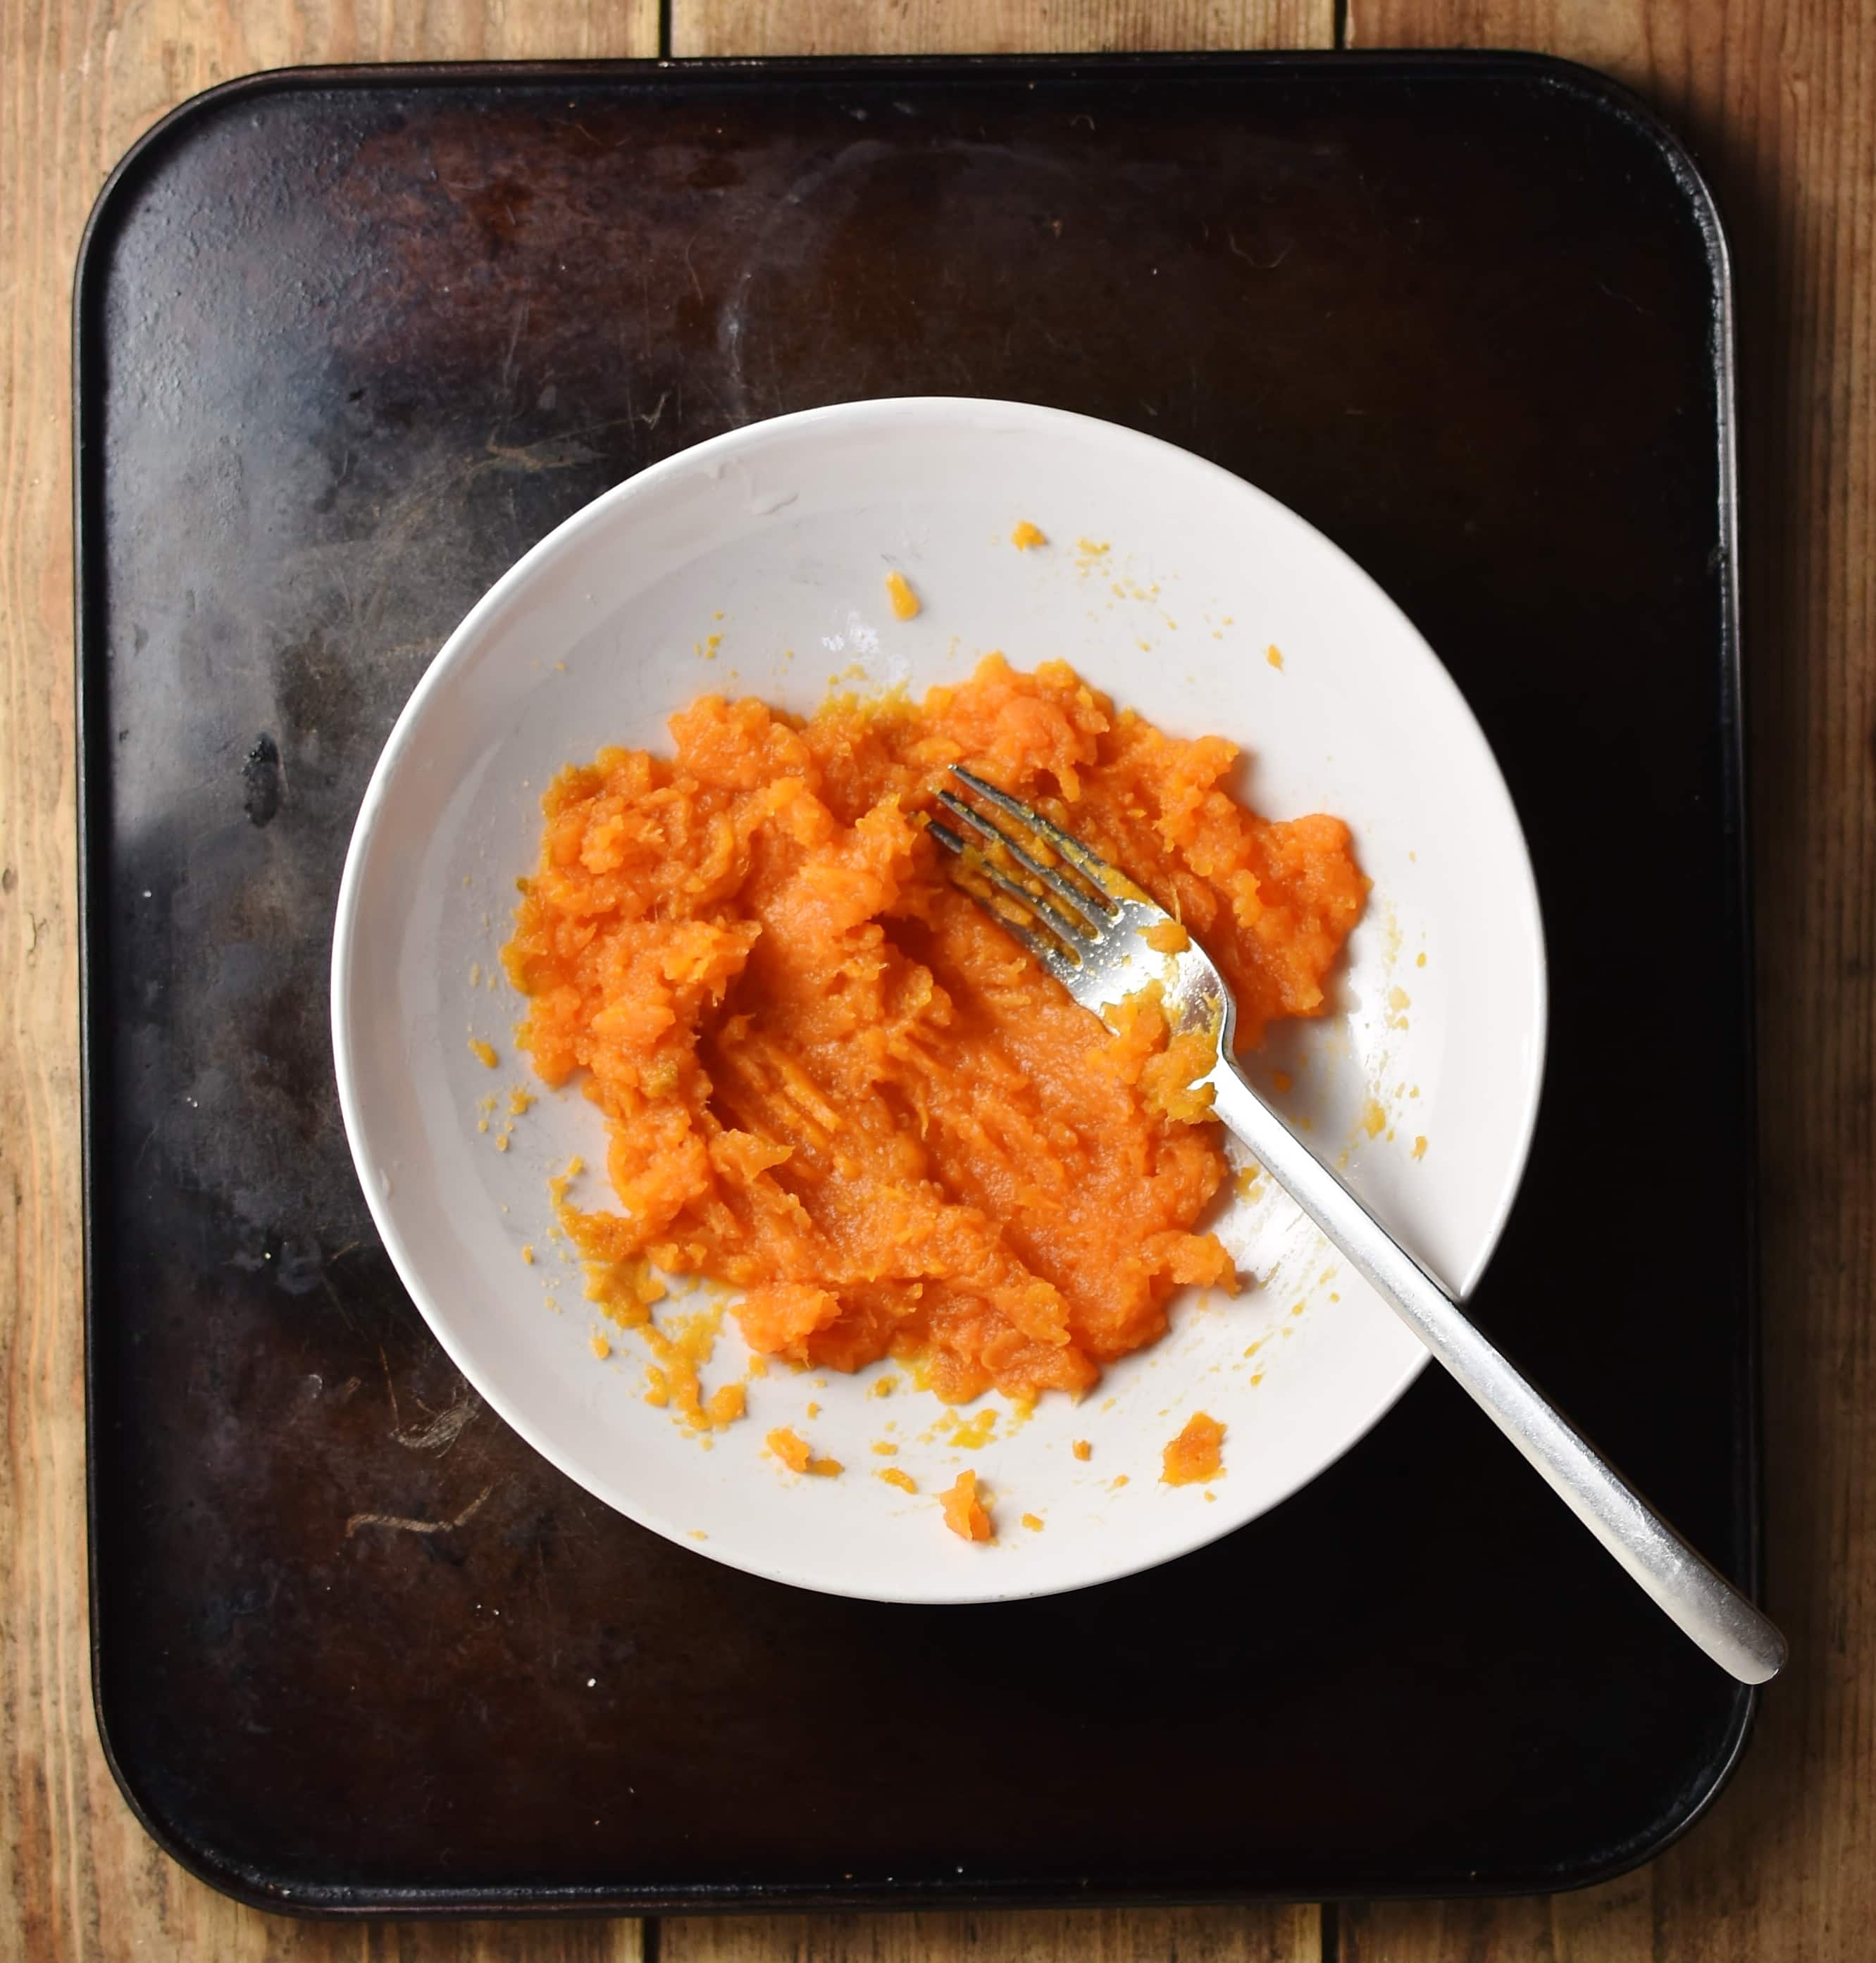 Top down view of mashed sweet potato in white bowl with fork.